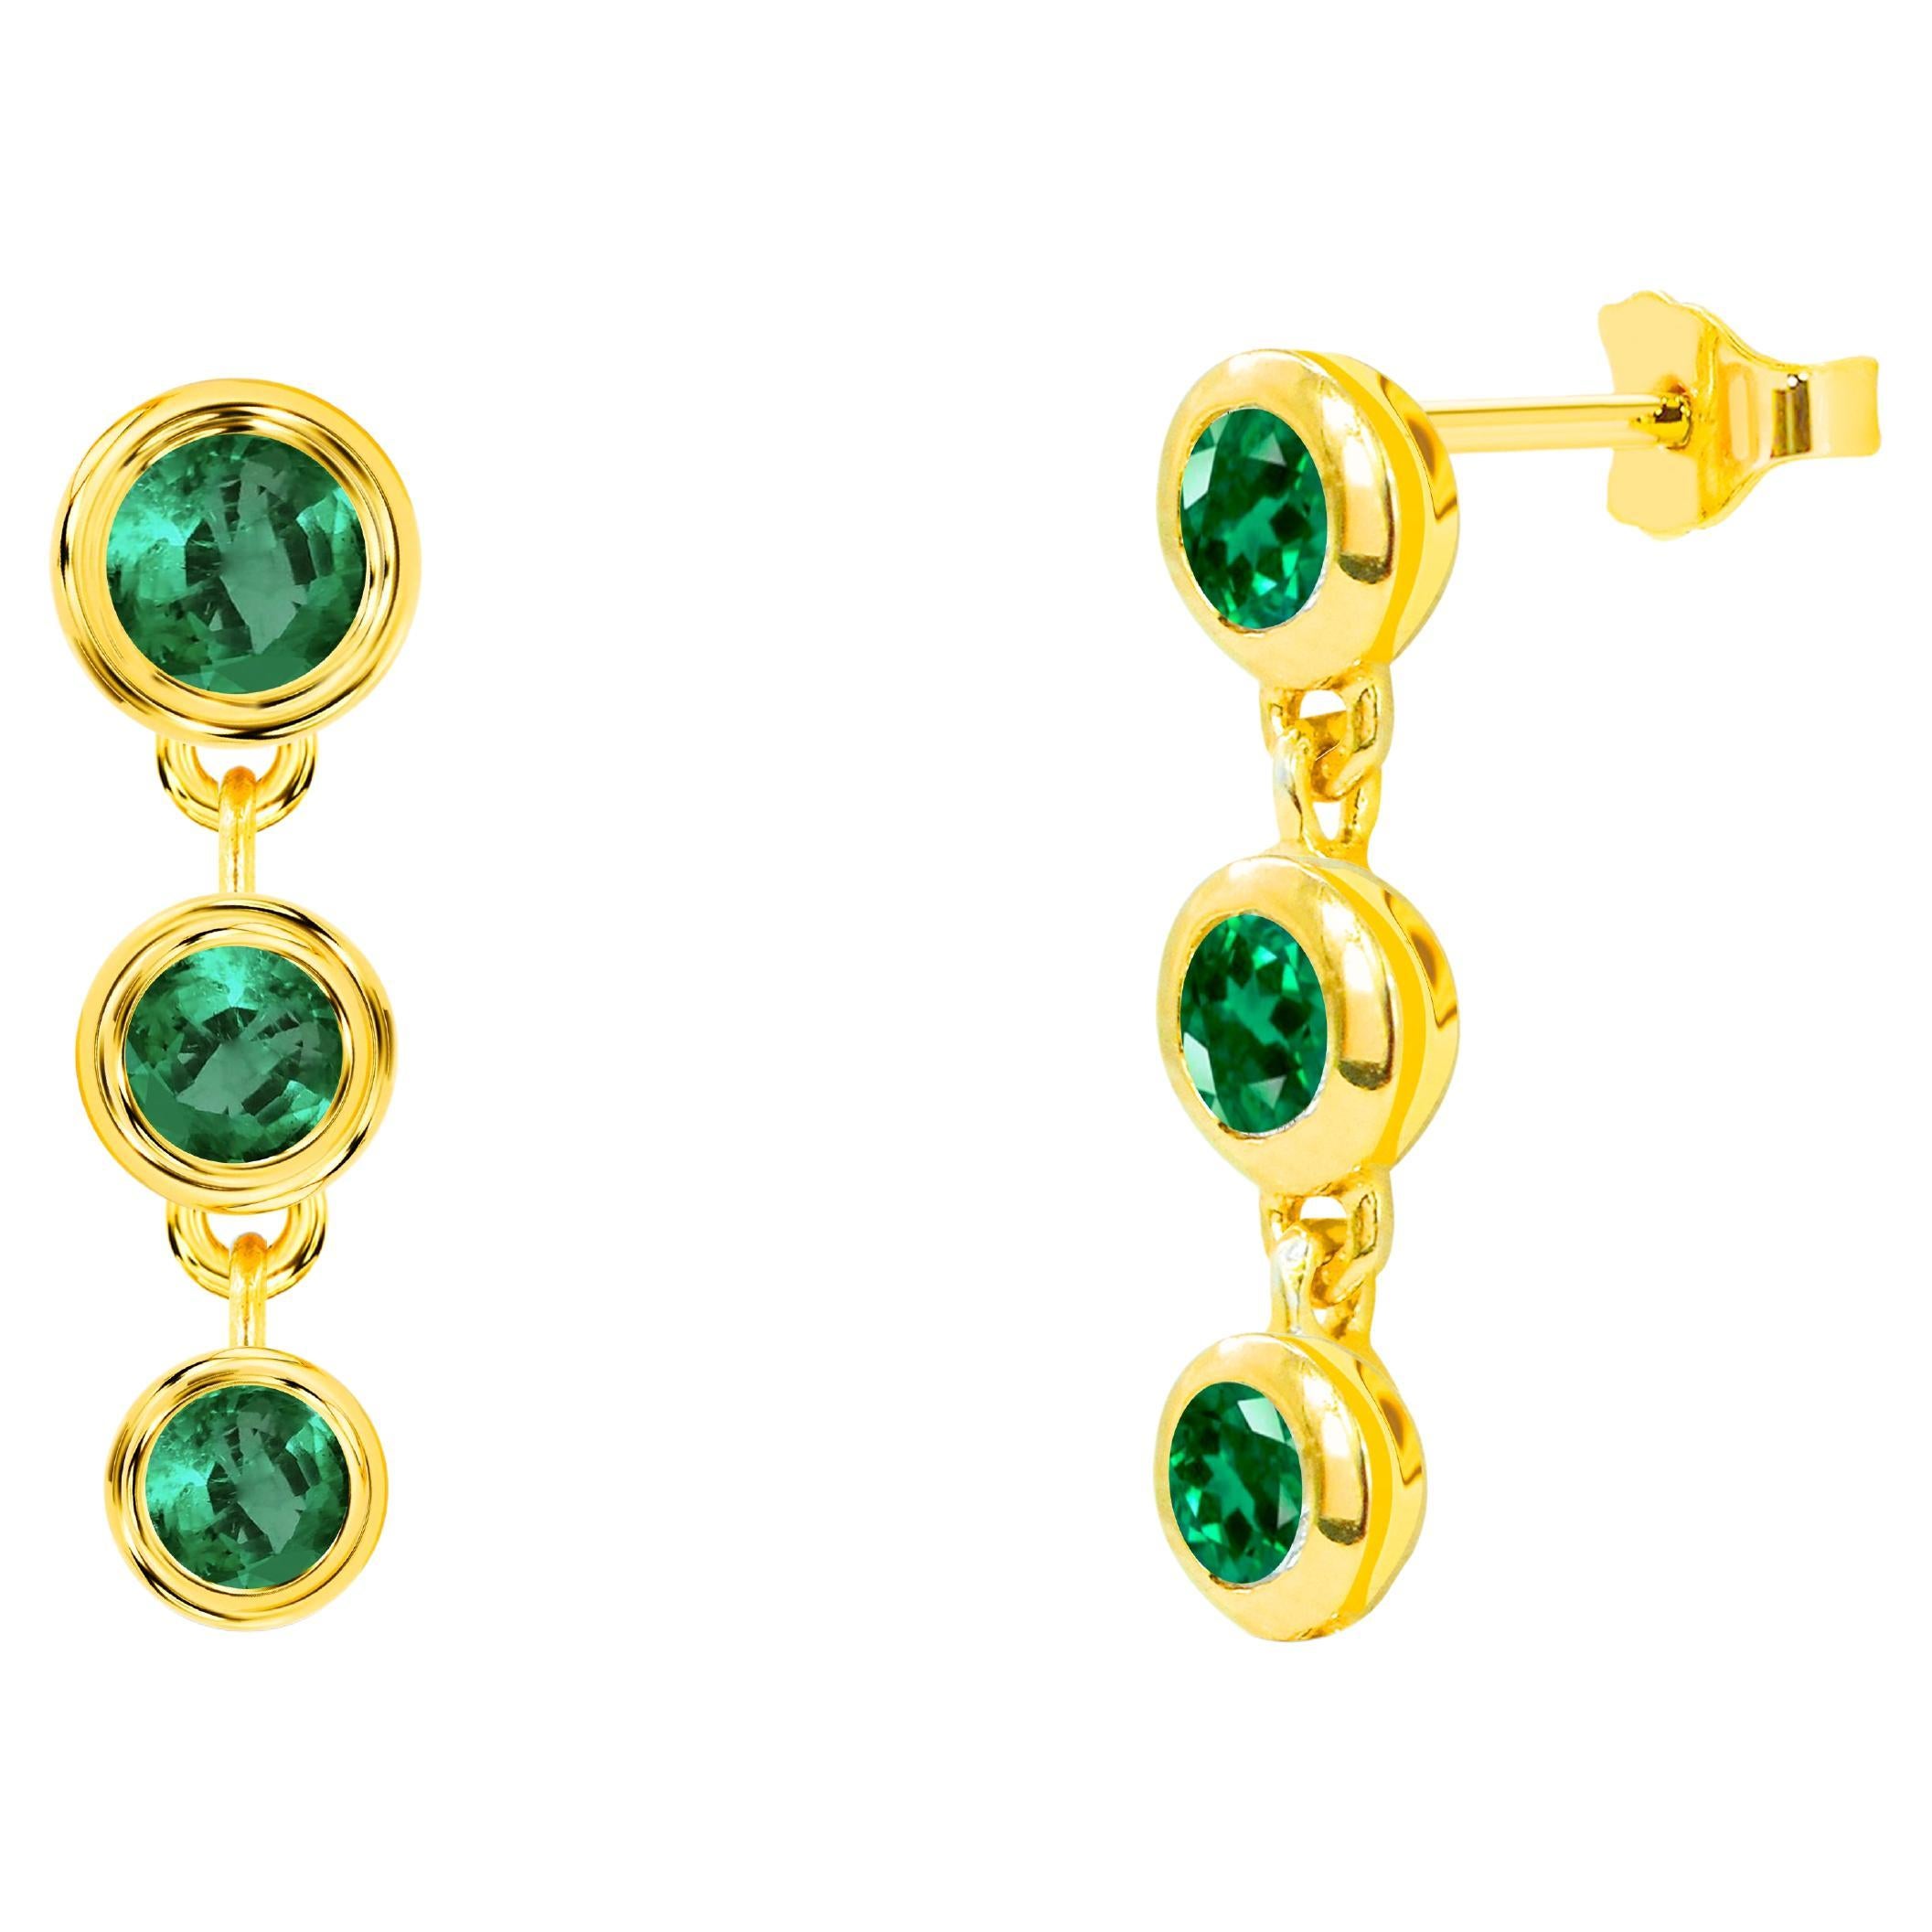 0.26ct Emerald Ruby and Sapphire Bezel Studs Earrings in 14k Gold